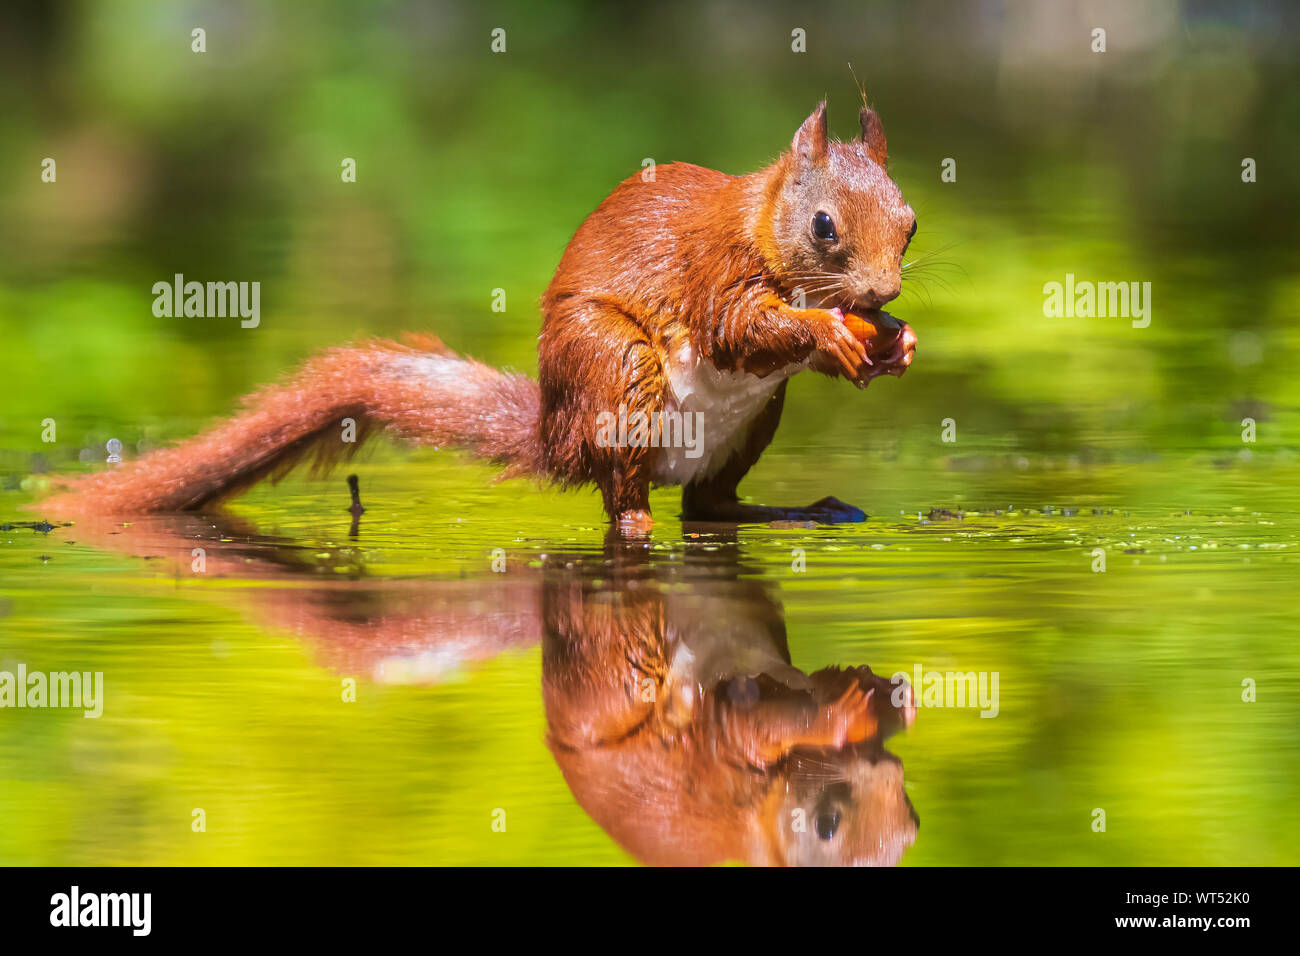 Beautiful Eurasian red squirrel, Sciurus vulgaris, drinking and foraging in water with reflection. Forest wildlife, selective focus, natural sunlight. Stock Photo